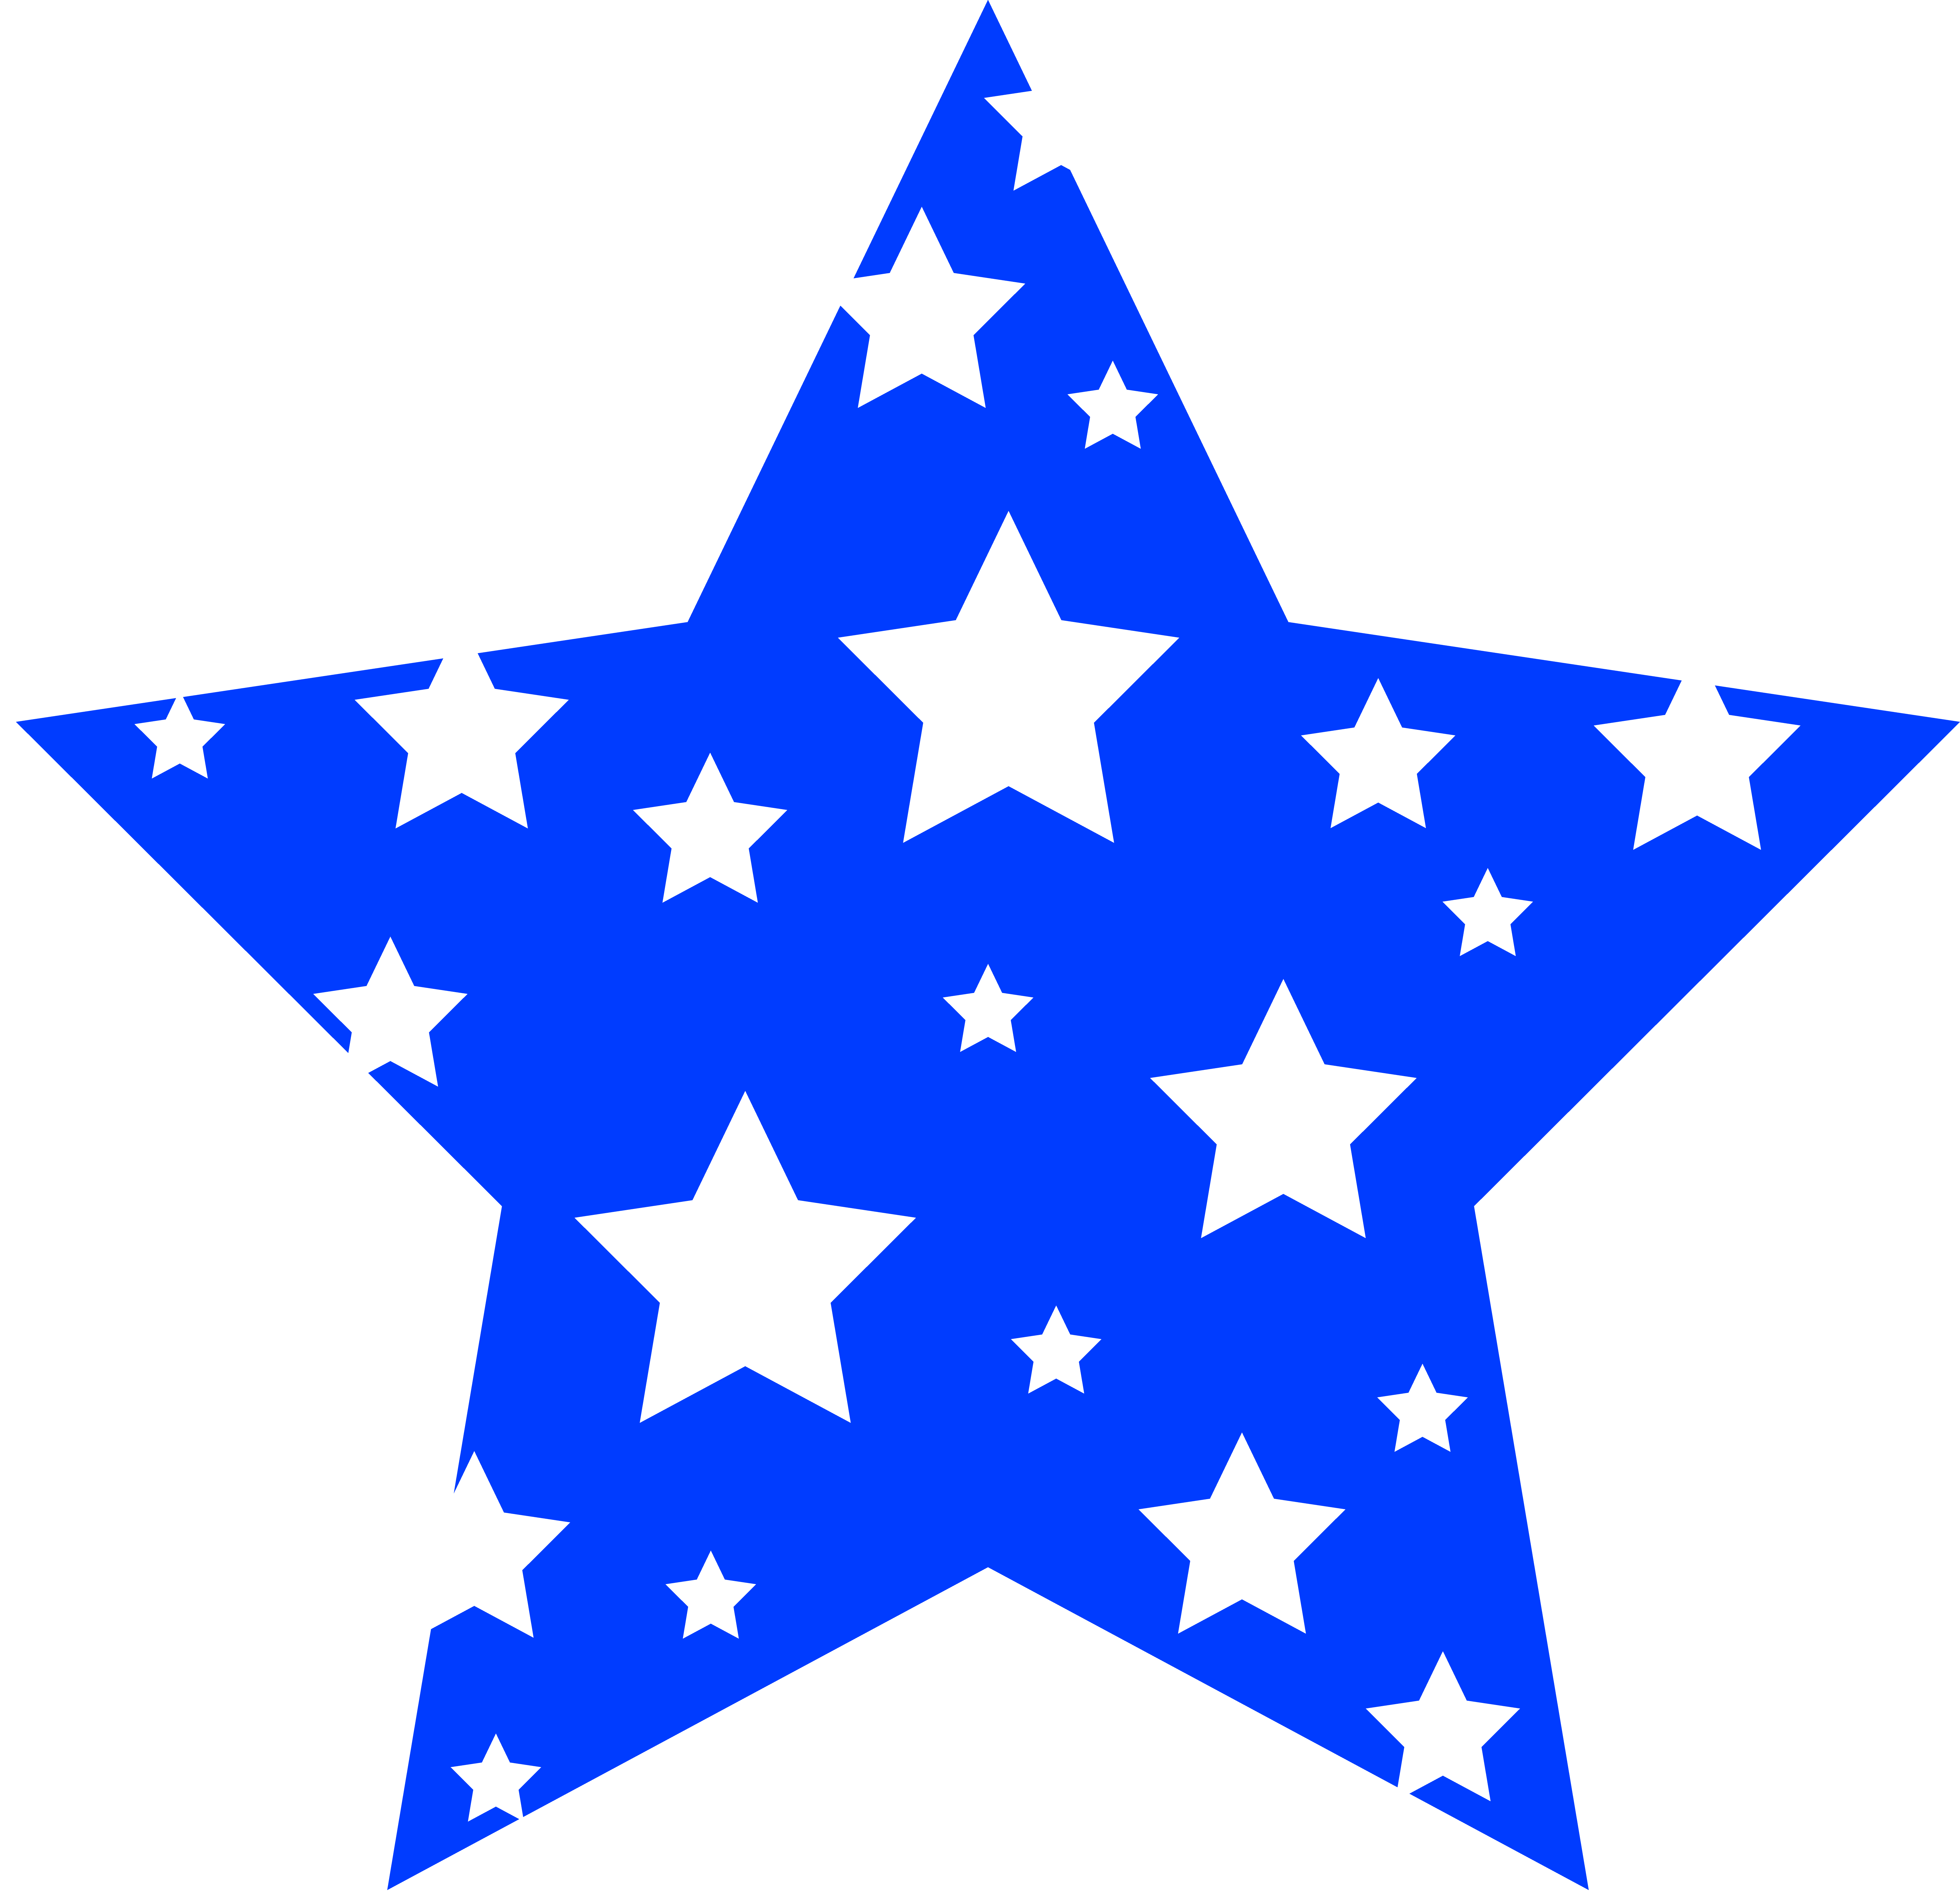 White Star Vector | Clipart Panda - Free Clipart Images